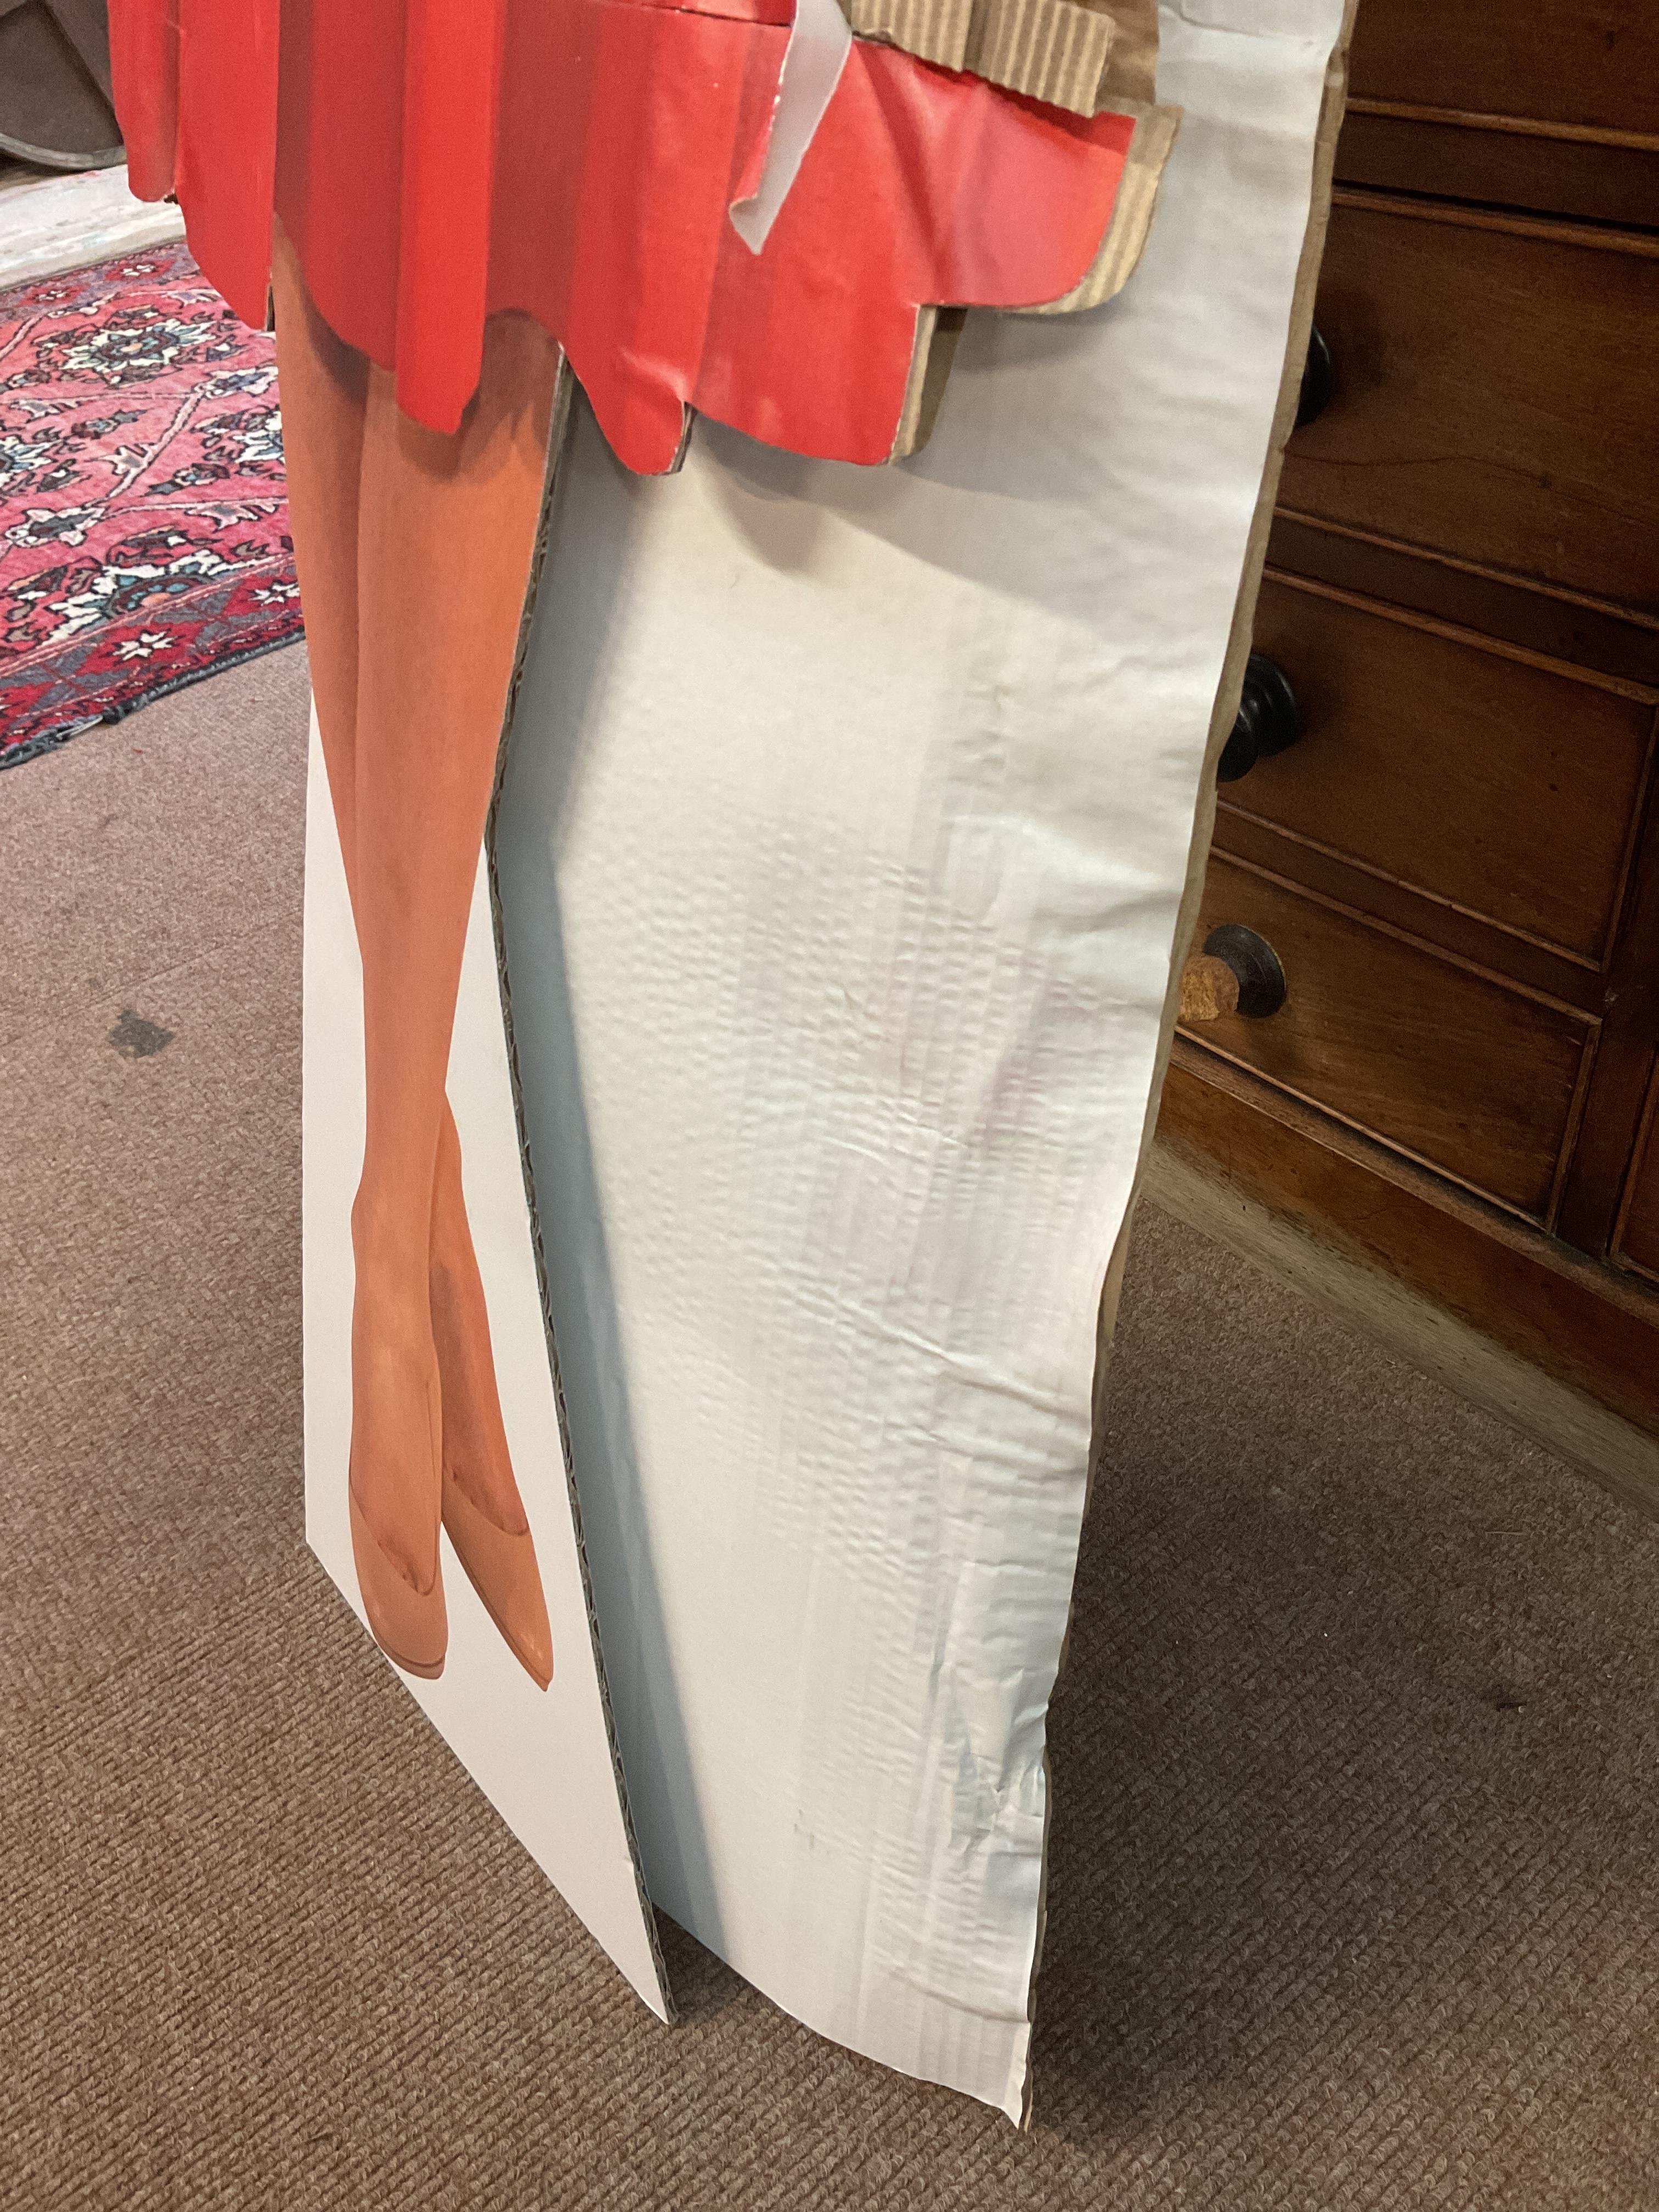 Beloved UK Taylor Swift cardboard cutout auctioned for charity in